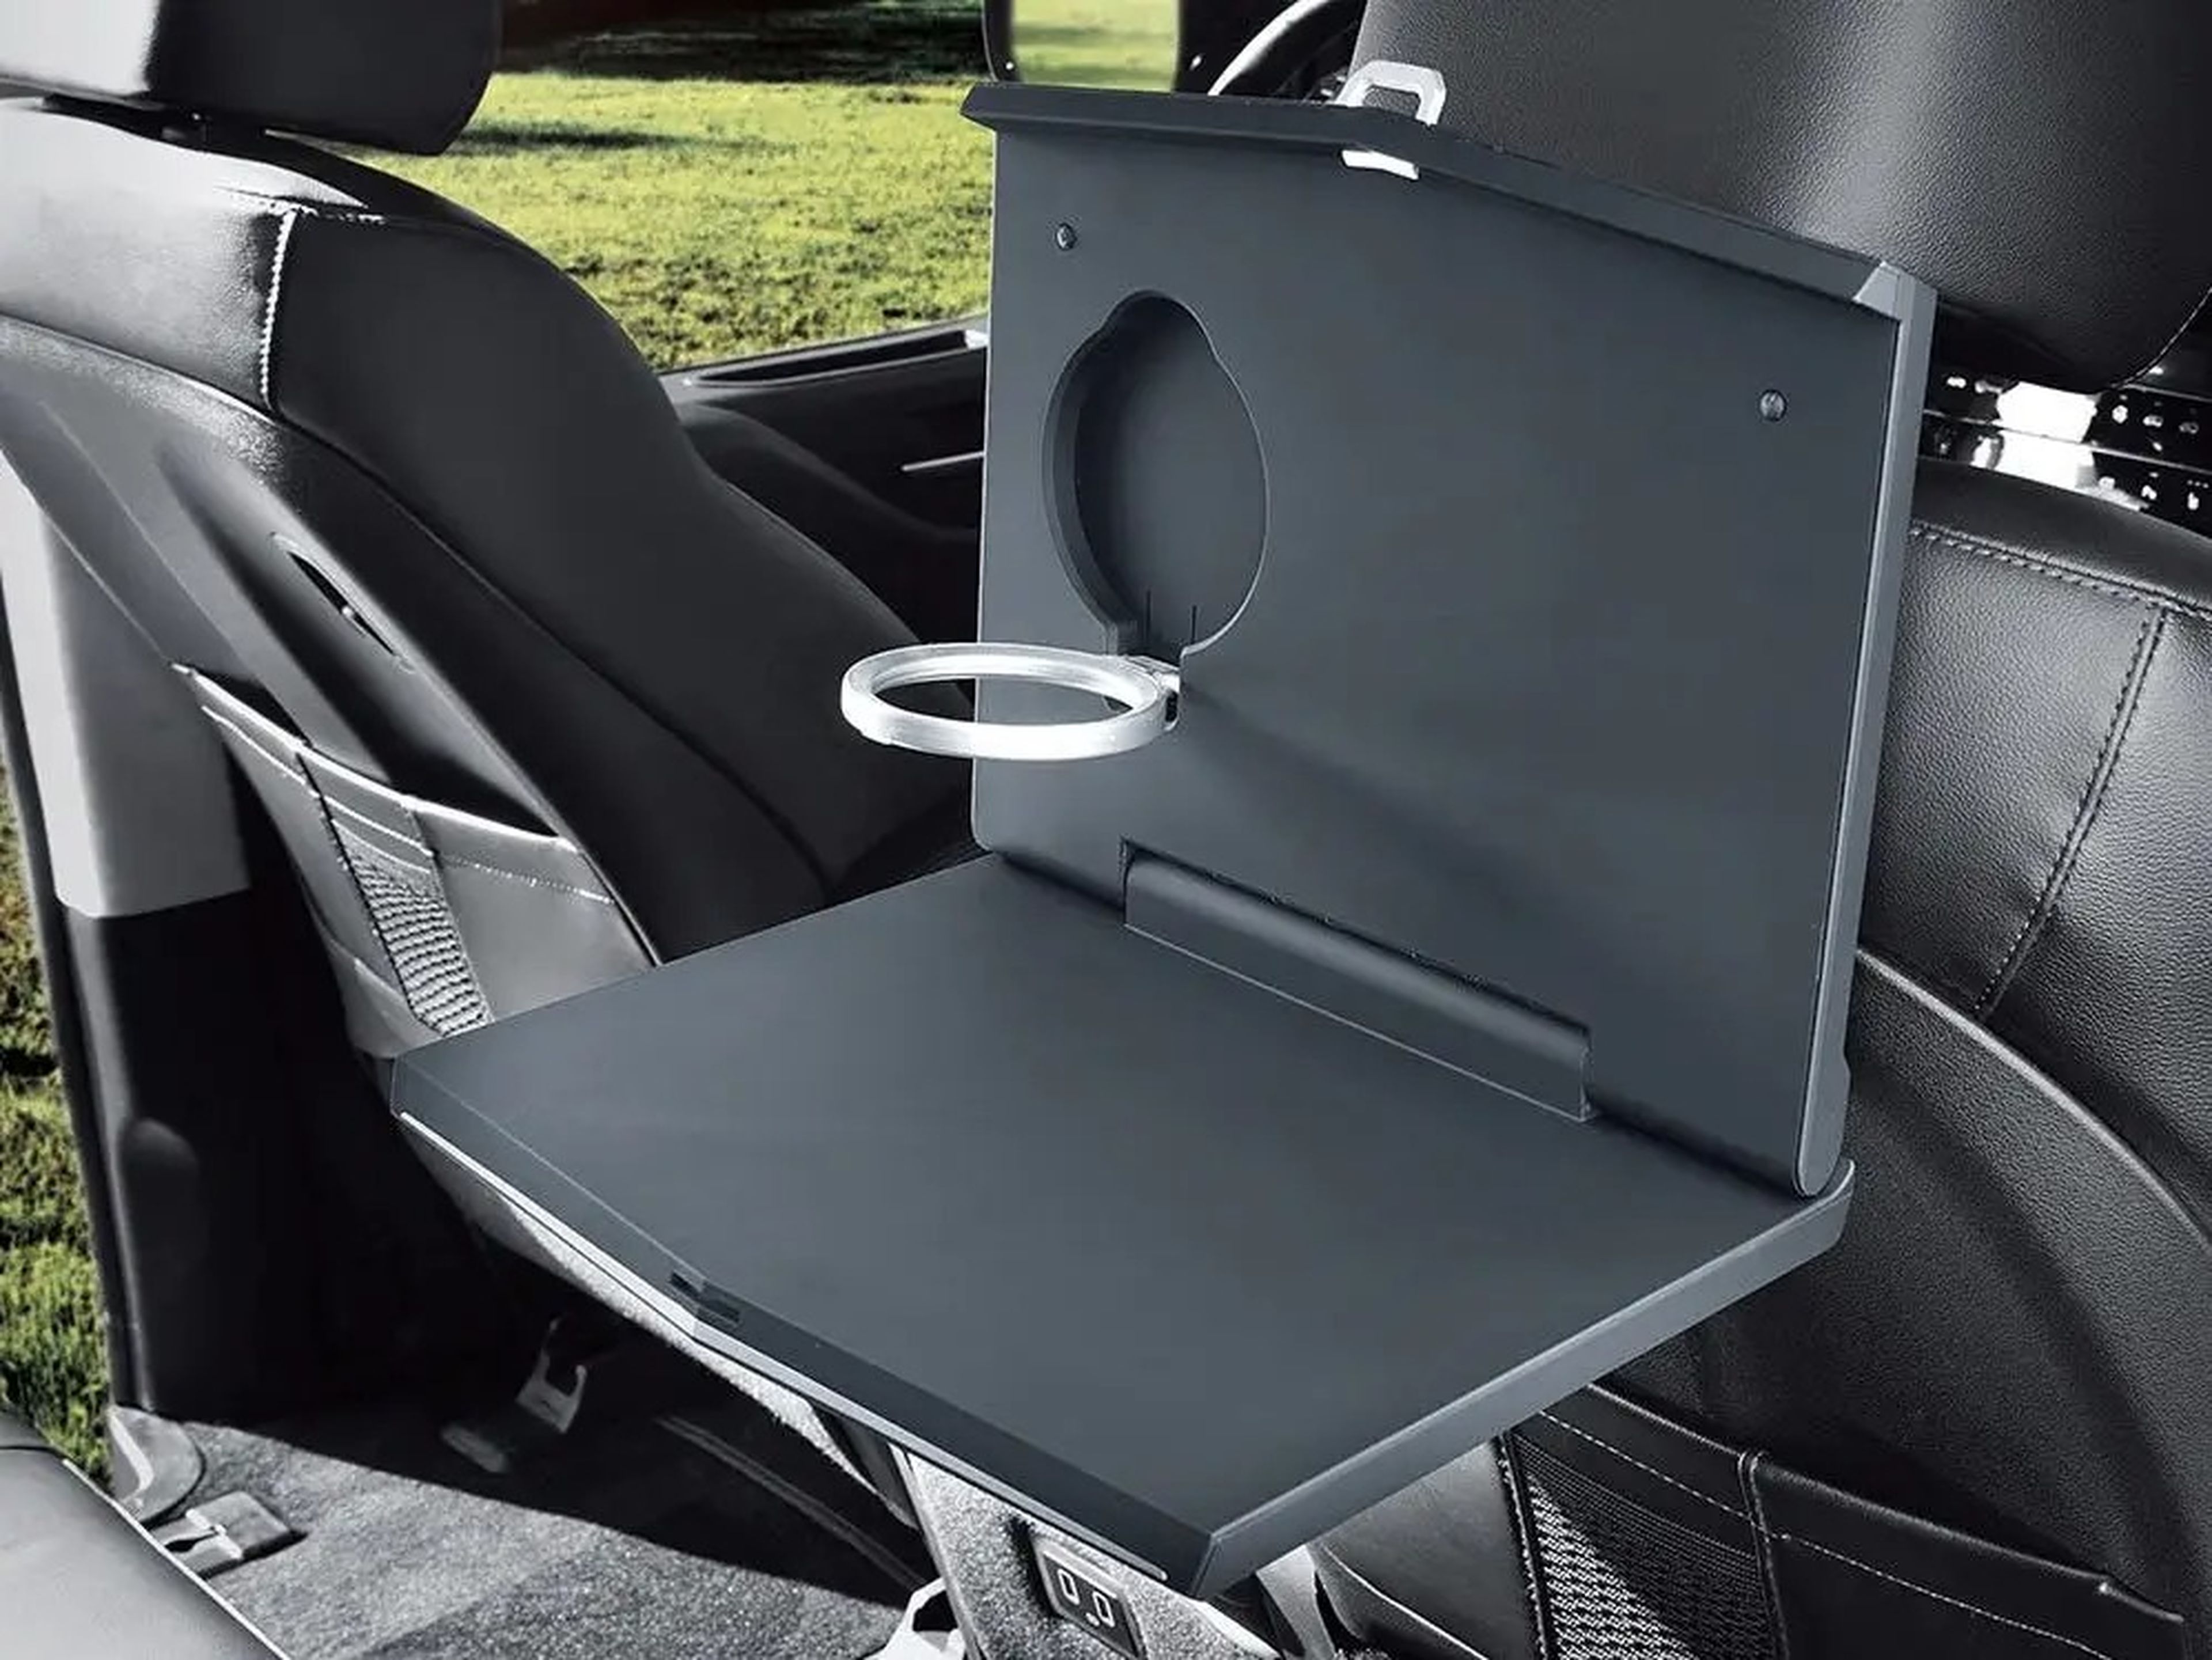 The Hyundai Staria Lounge Camper's interior table in front of a seat.